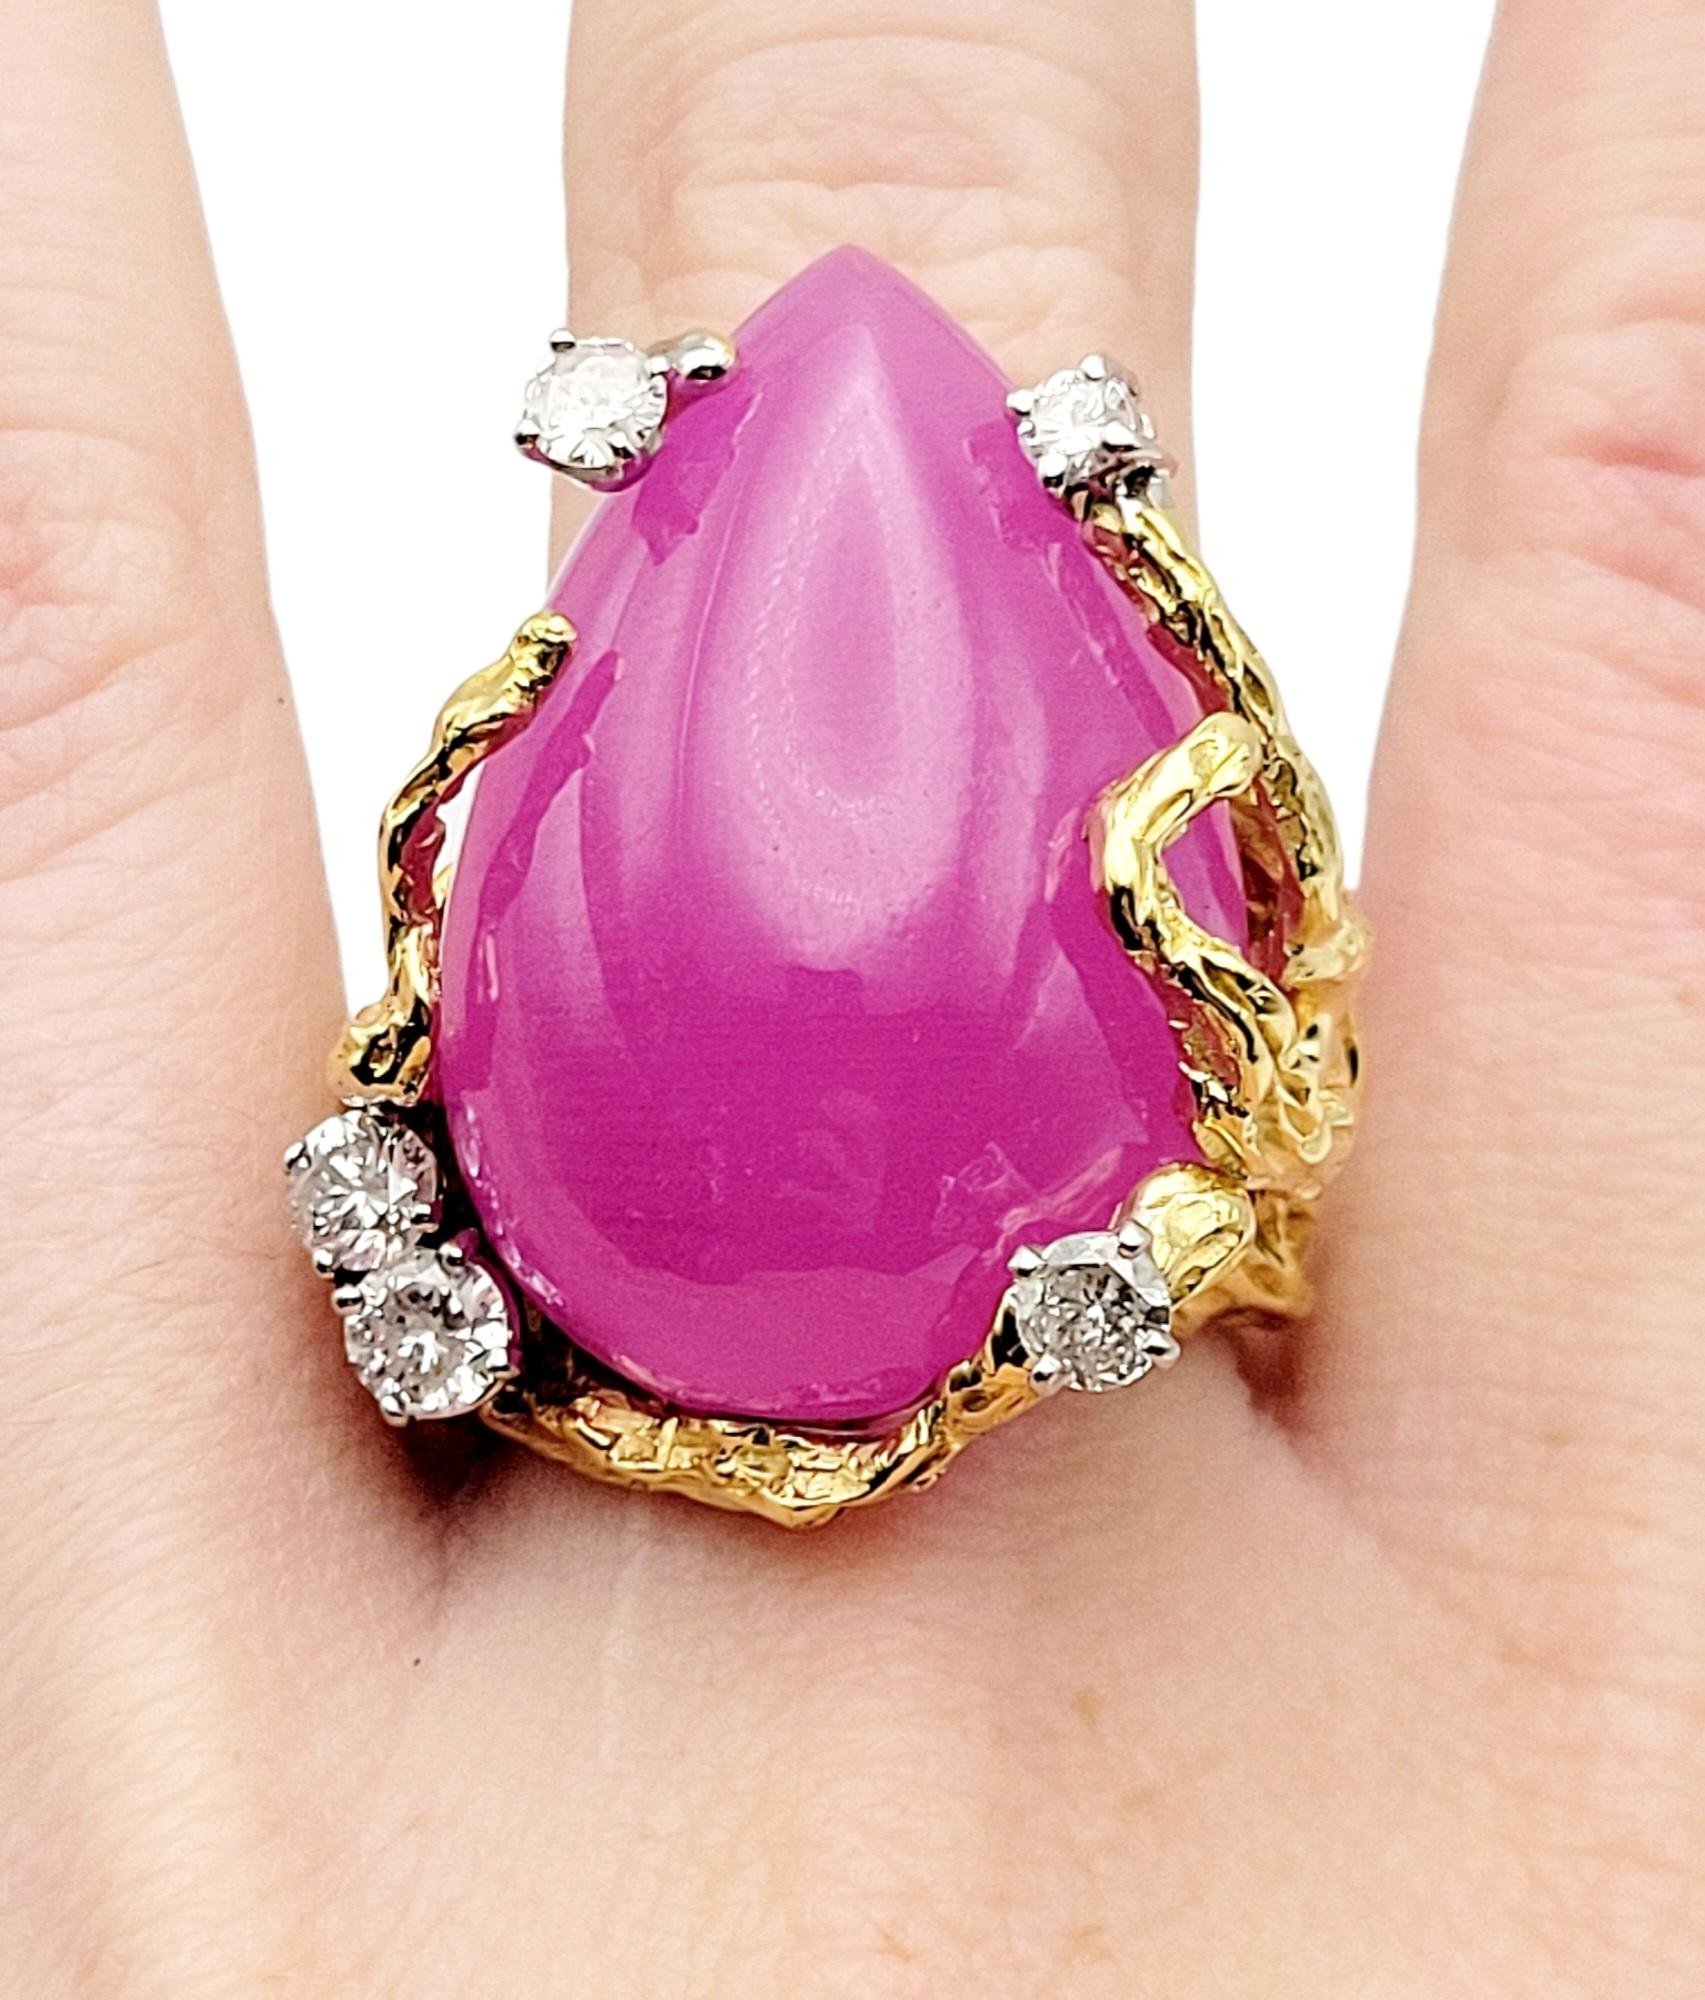 Huge Pear Cabochon Lab Created Pink Sapphire Branch Design Ring in 14 Karat Gold 8